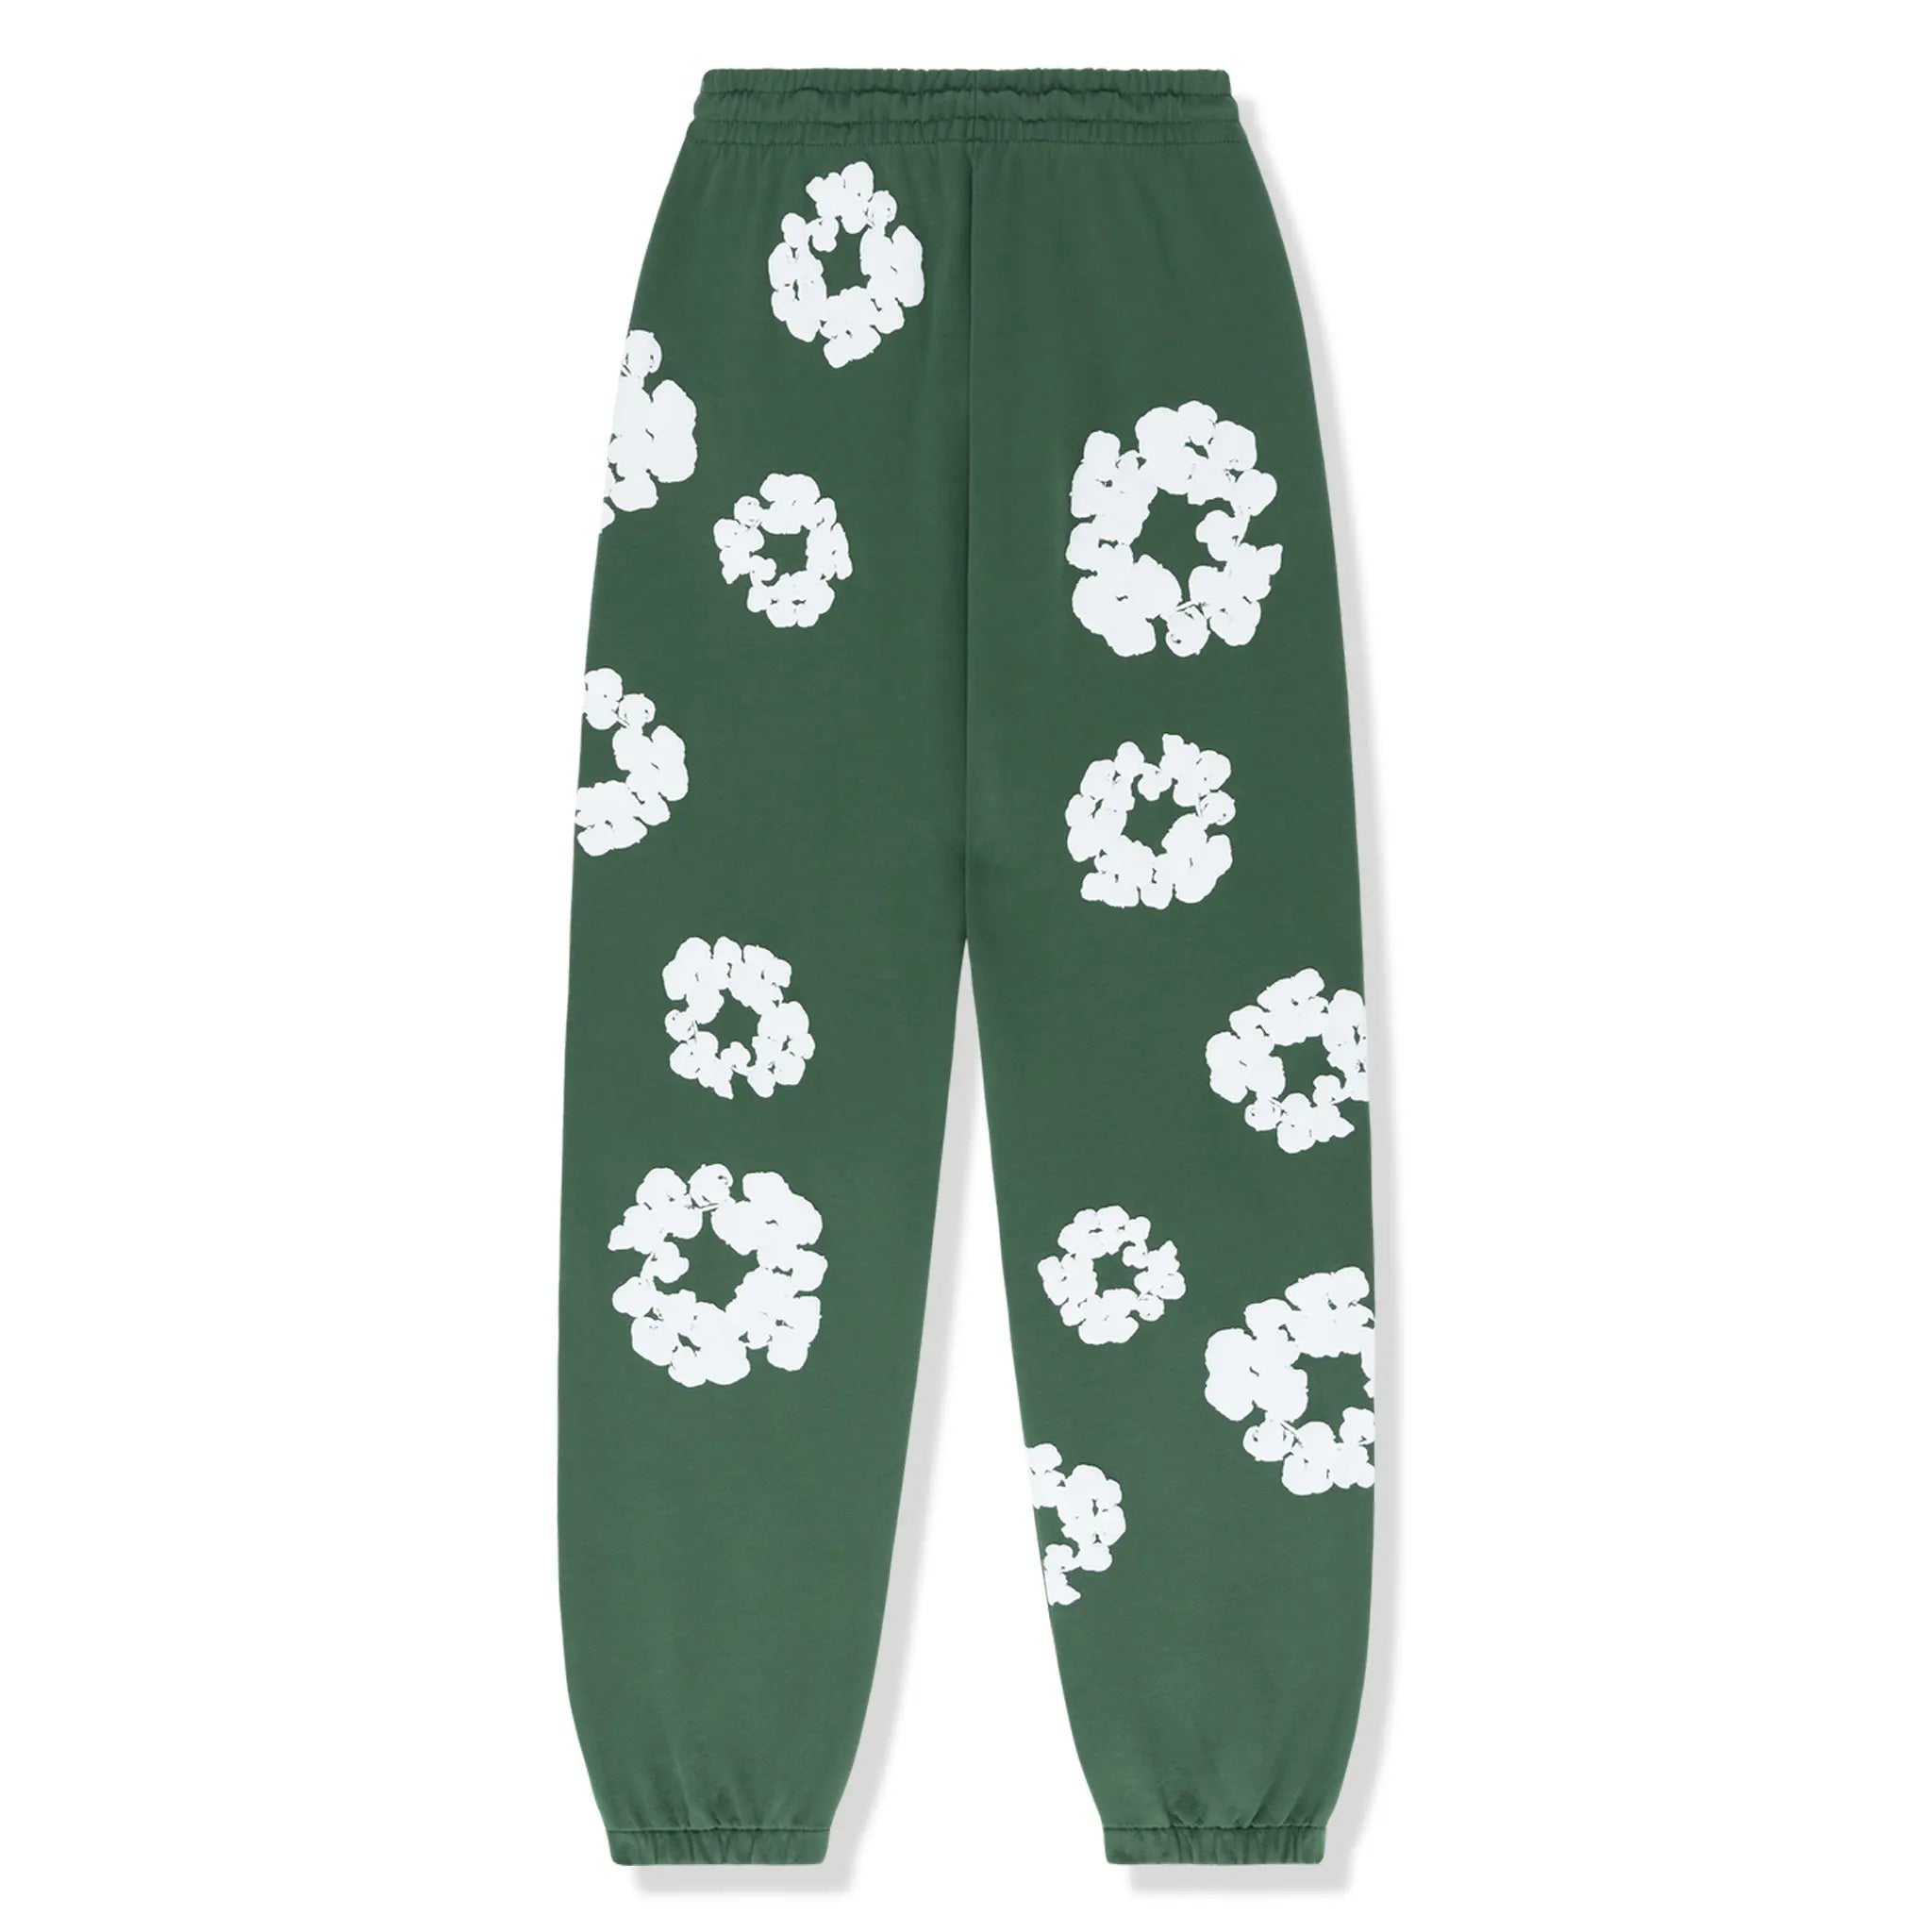 Back view of Denim Tears The Cotton Wreath Green Sweatpants 401-060-30